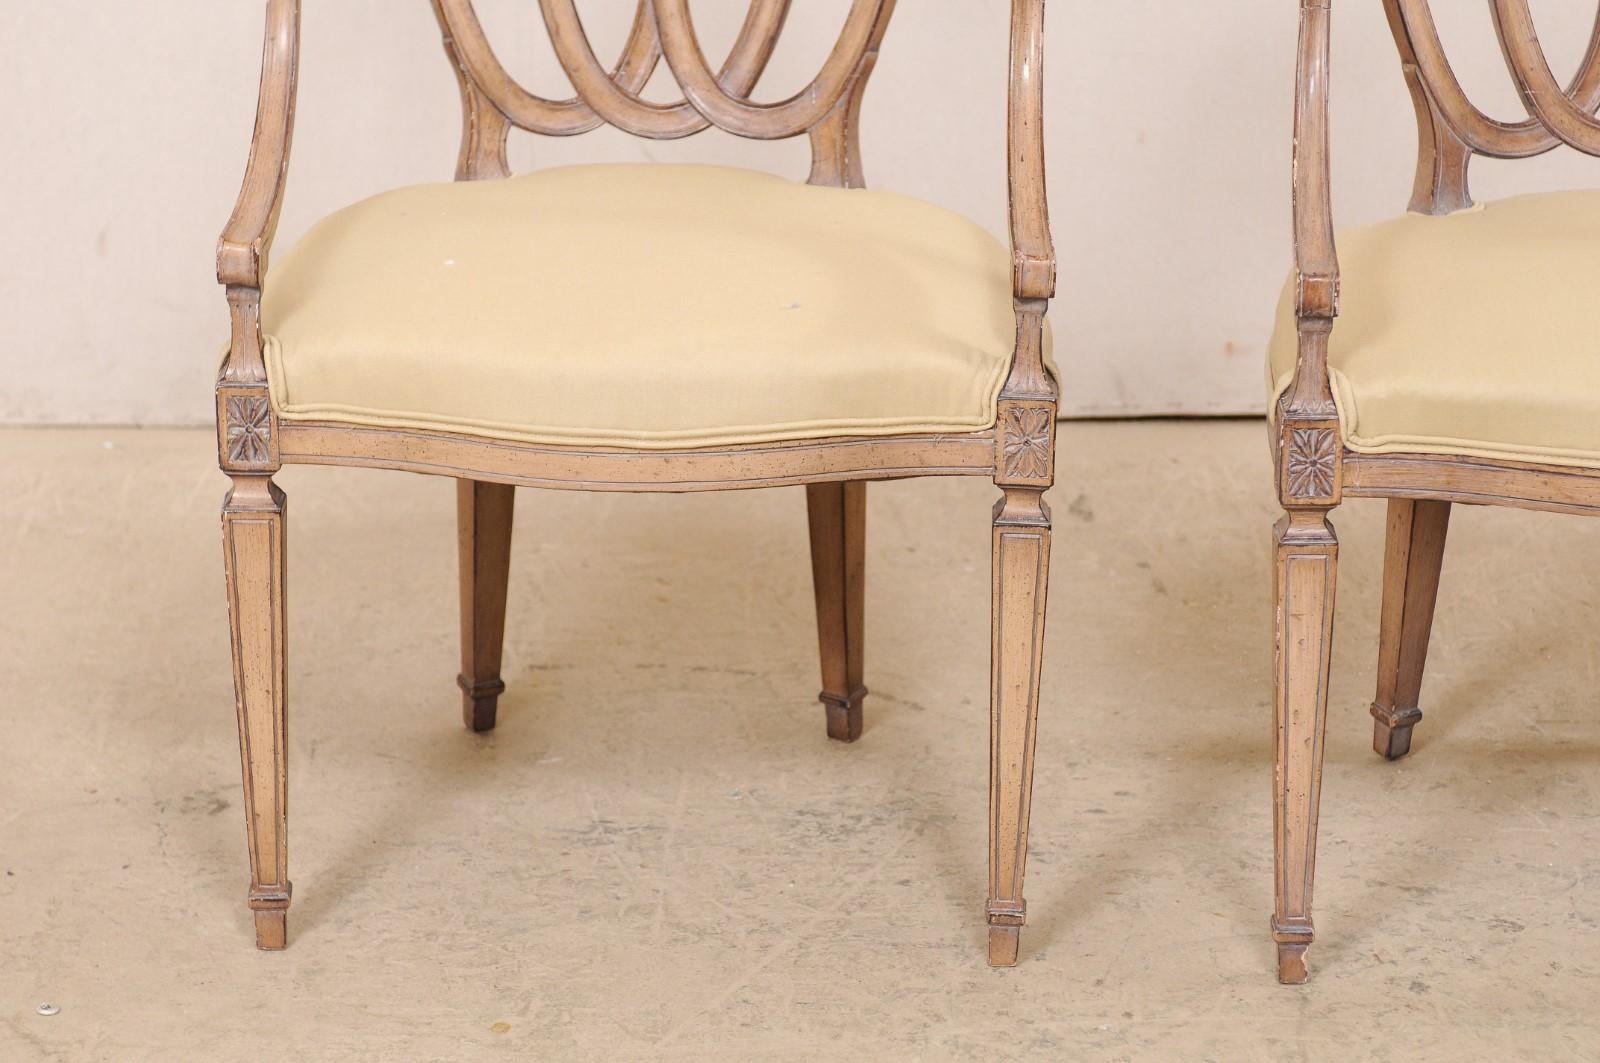 Italian Pair of Carved-Wood Armchairs with Upholstered Seats, Mid-20th Century For Sale 7